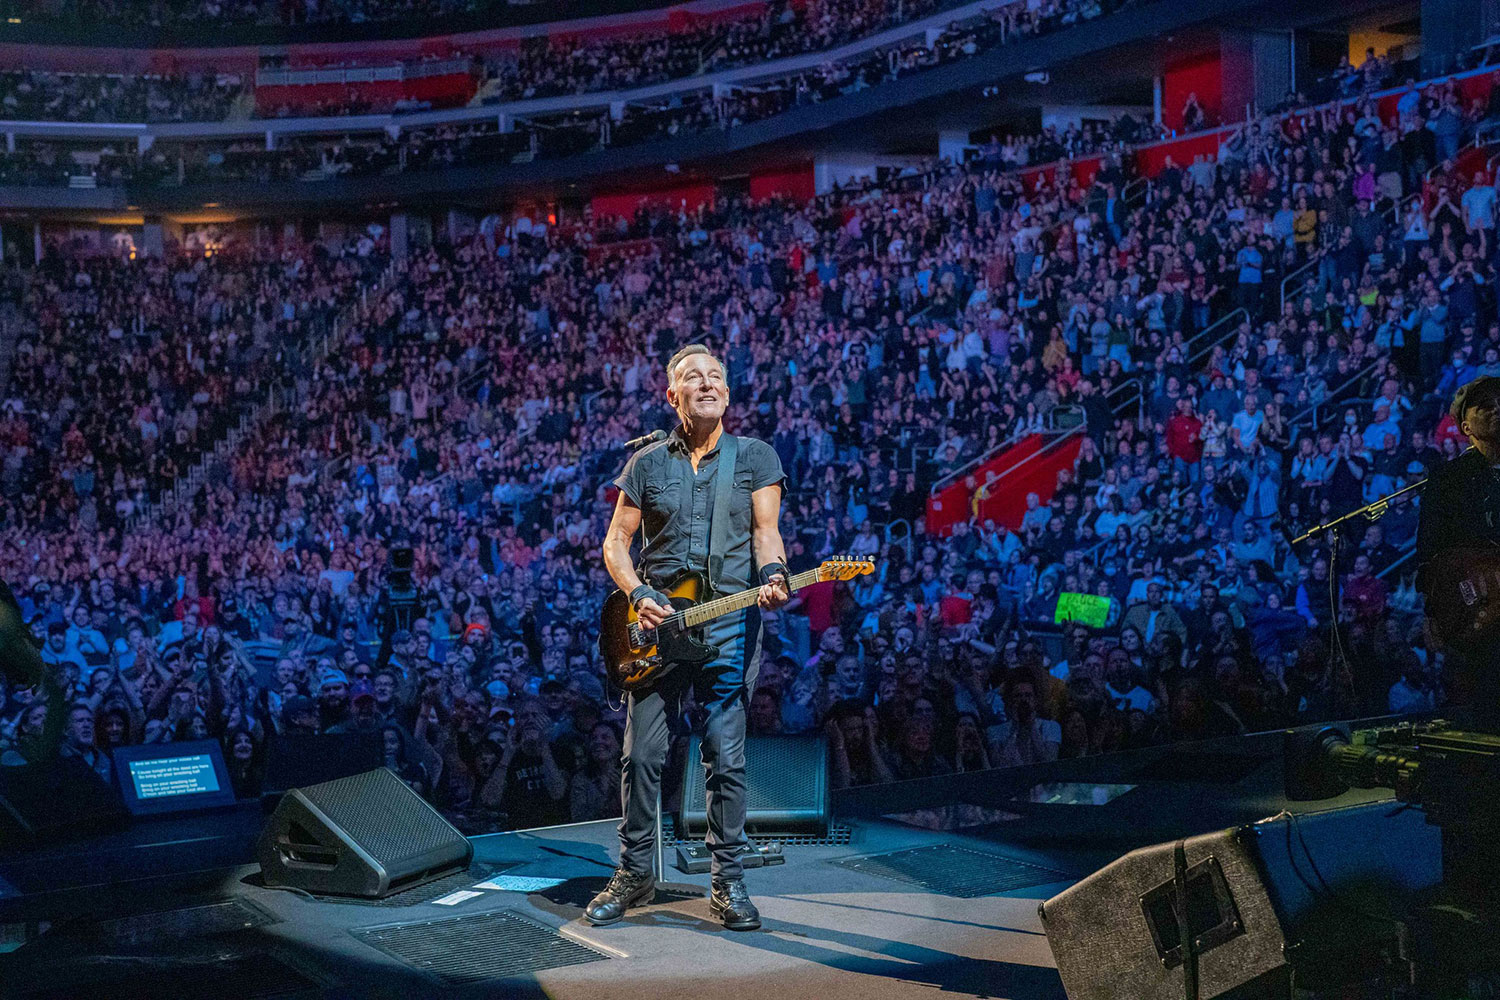 Bruce Springsteen & E Street Band at Little Caesars Arena, Detroit, MI on March 29, 2023.